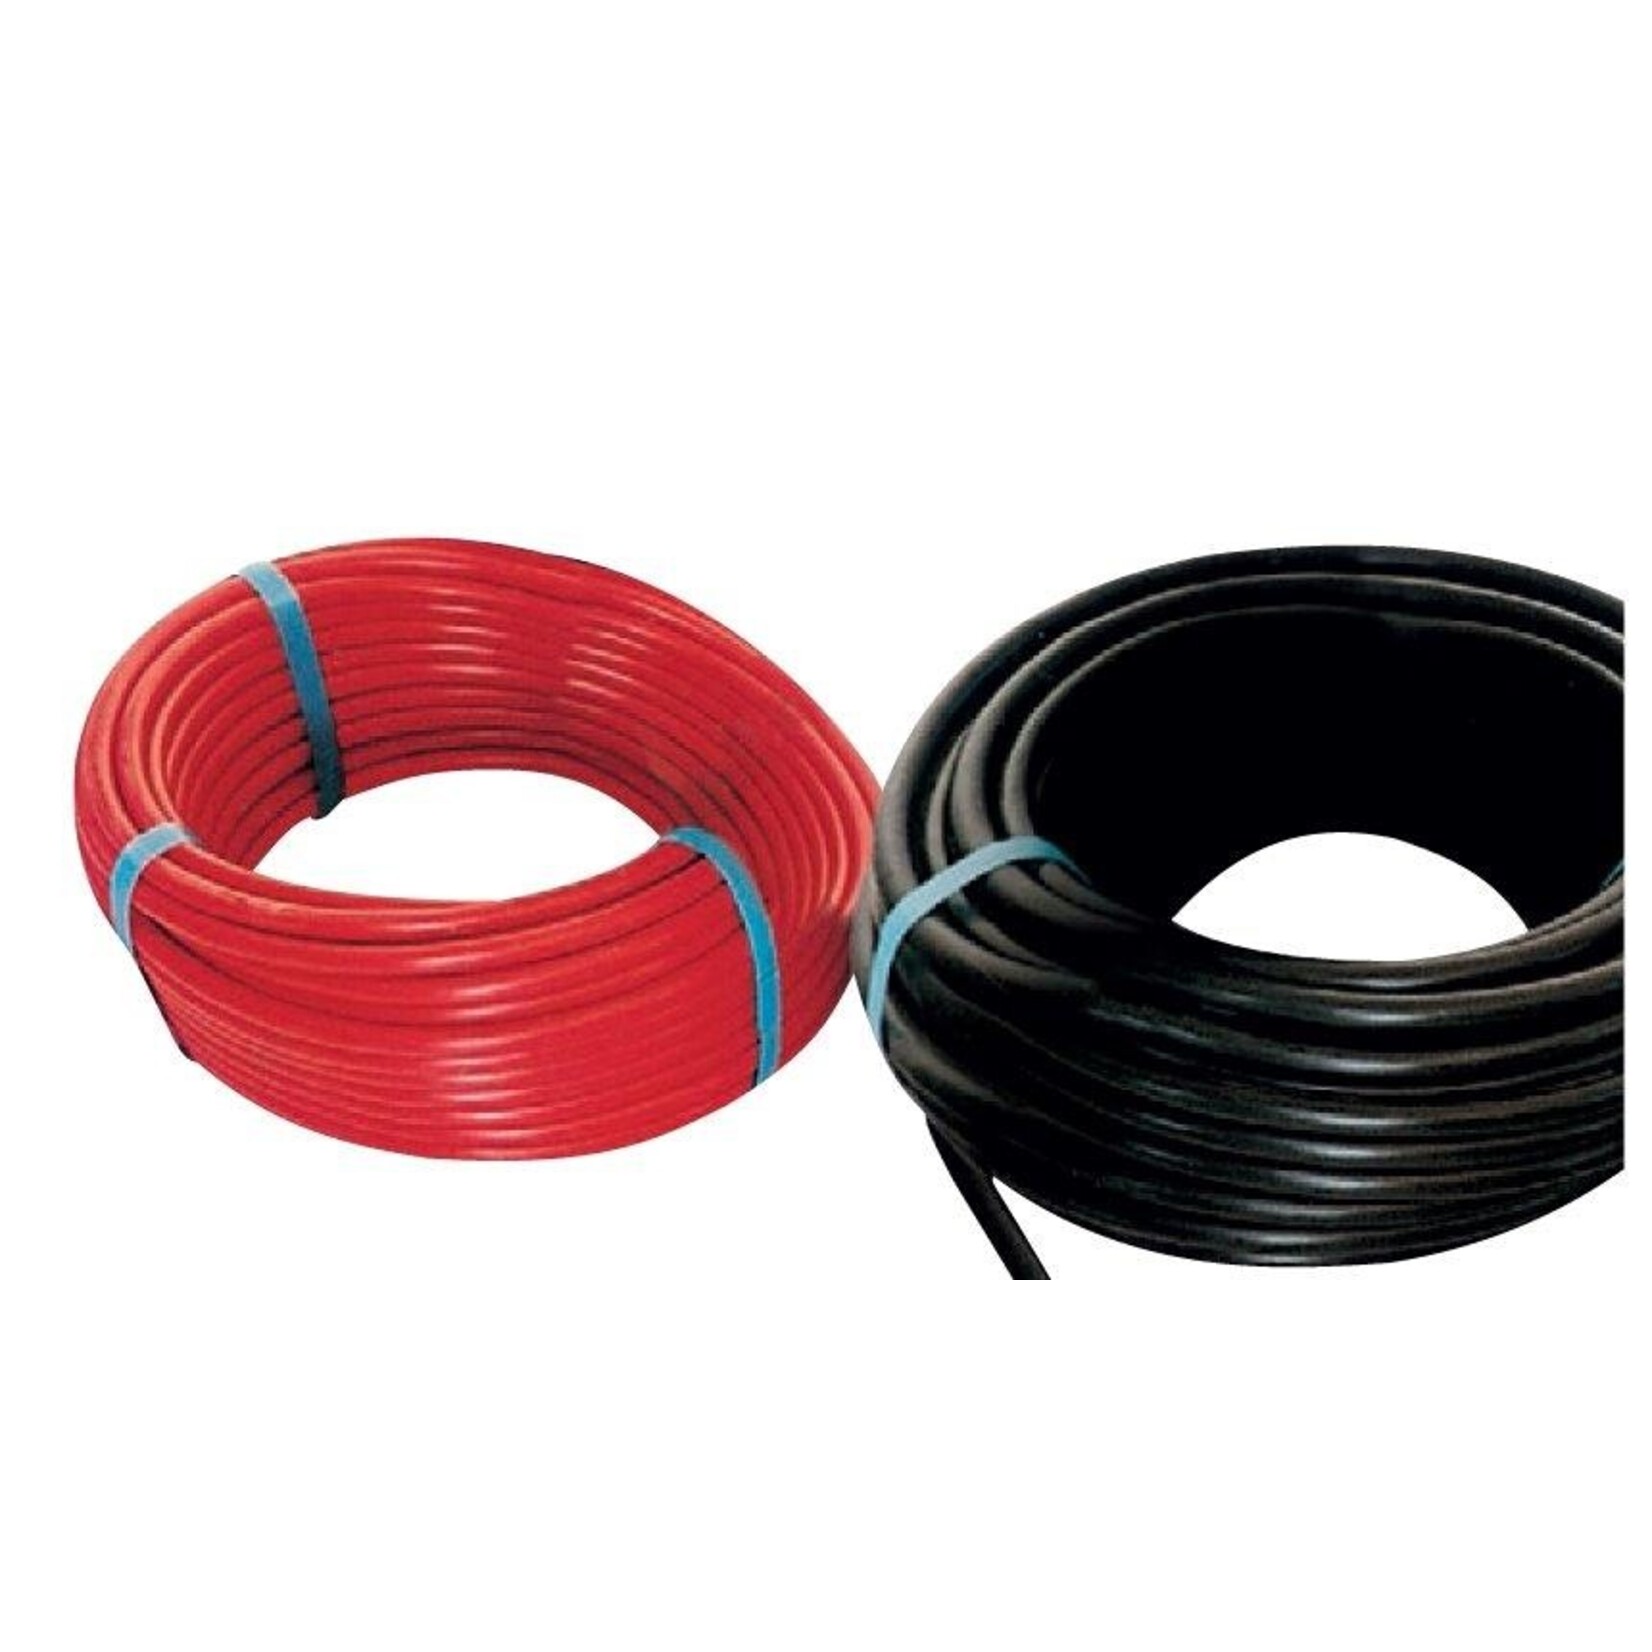 Plastimo Cable 10mm2 red 24tth 25m